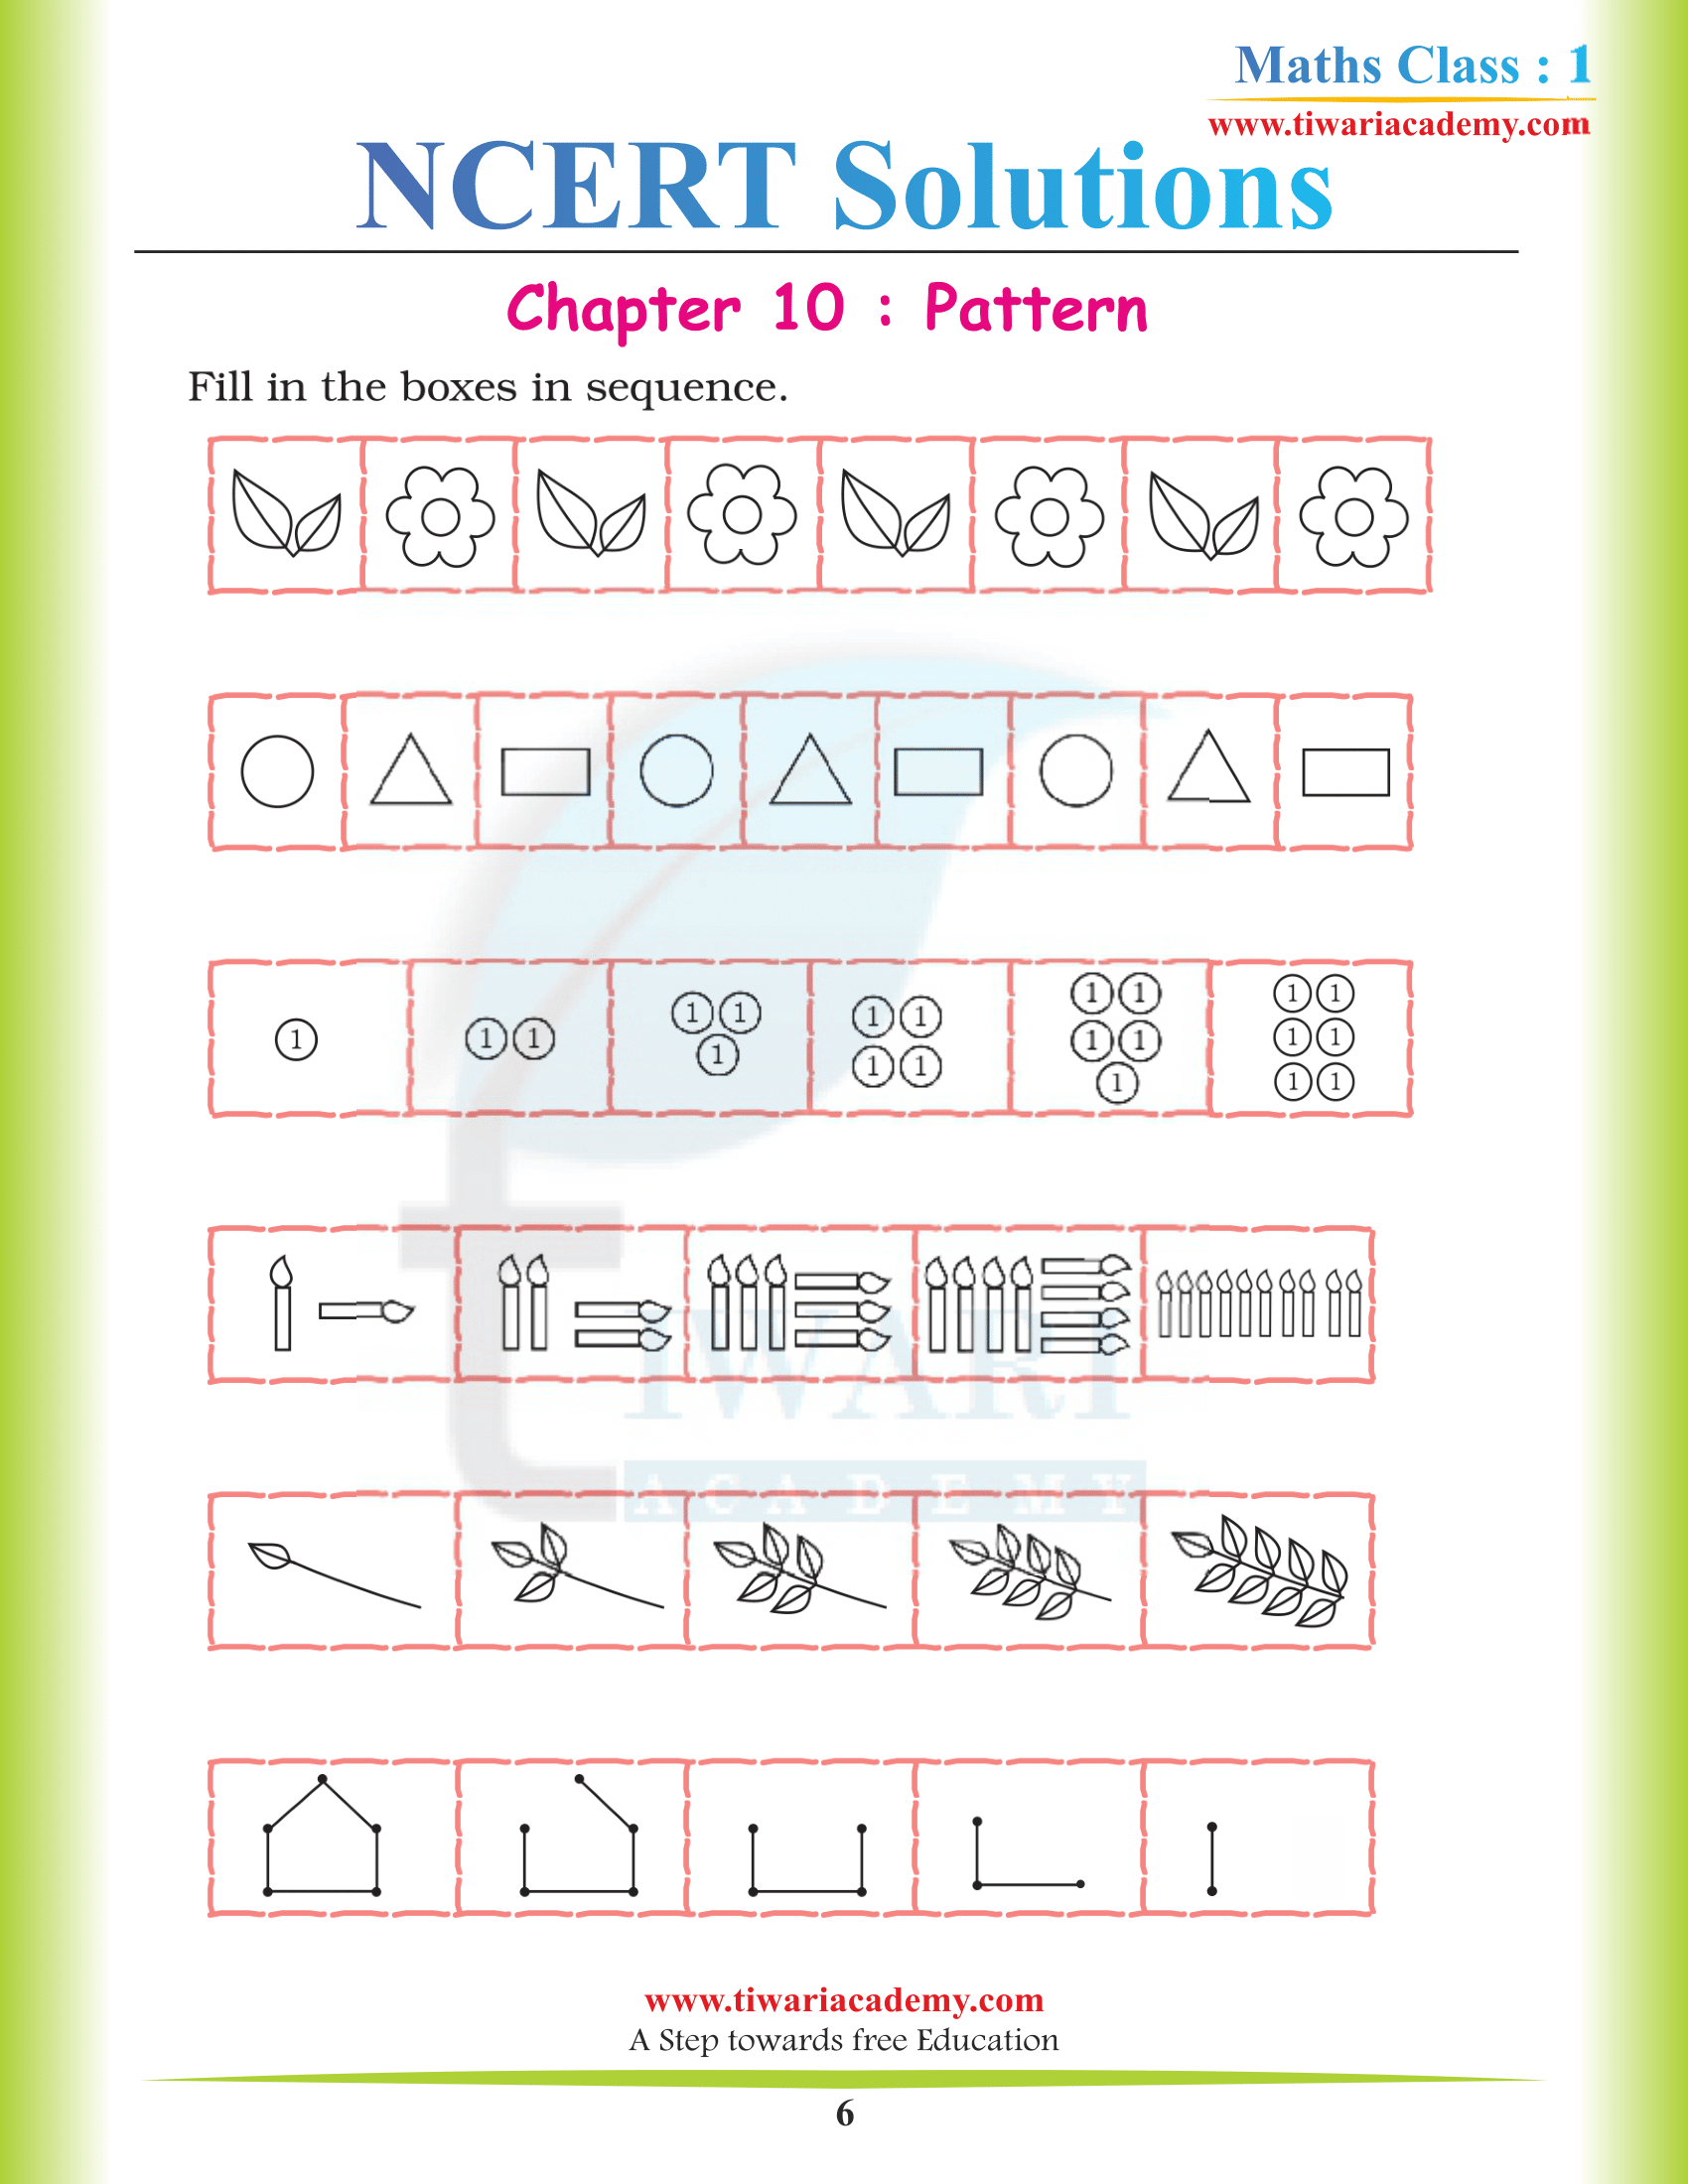 NCERT Solutions for Class 1 Maths Chapter 10 free